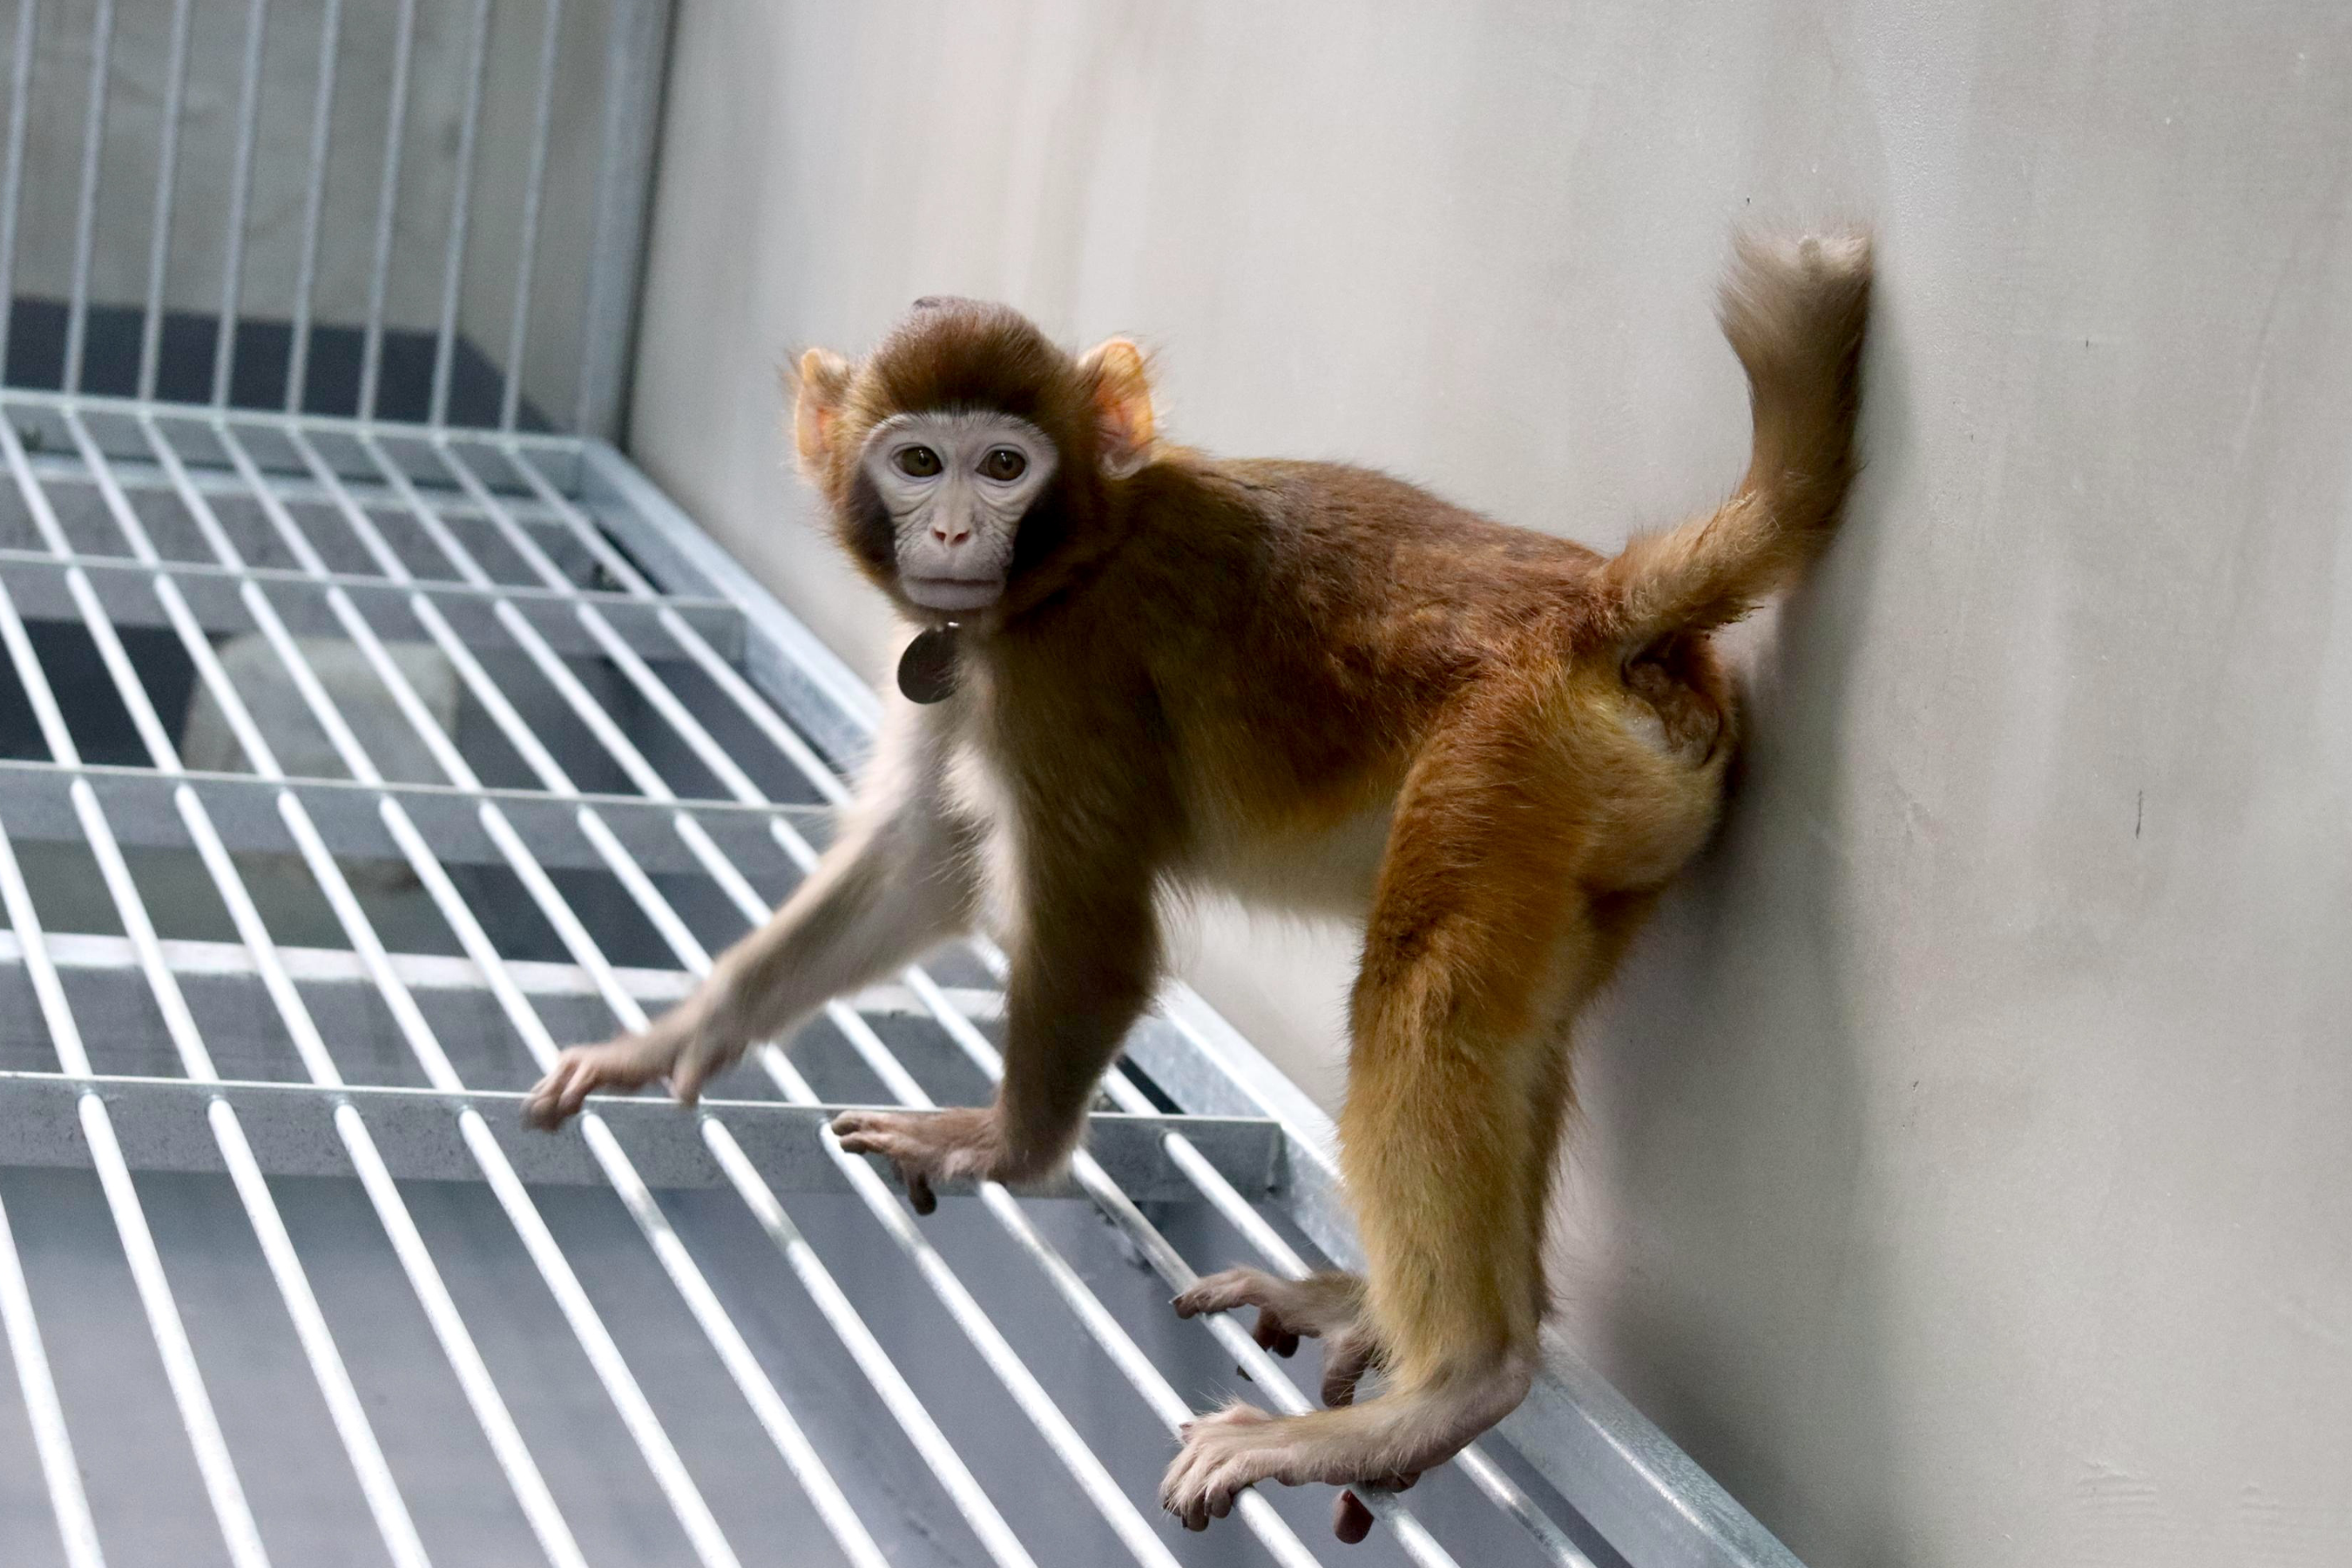 Meet ReTro, the First Cloned Rhesus Monkey to Reach Adulthood